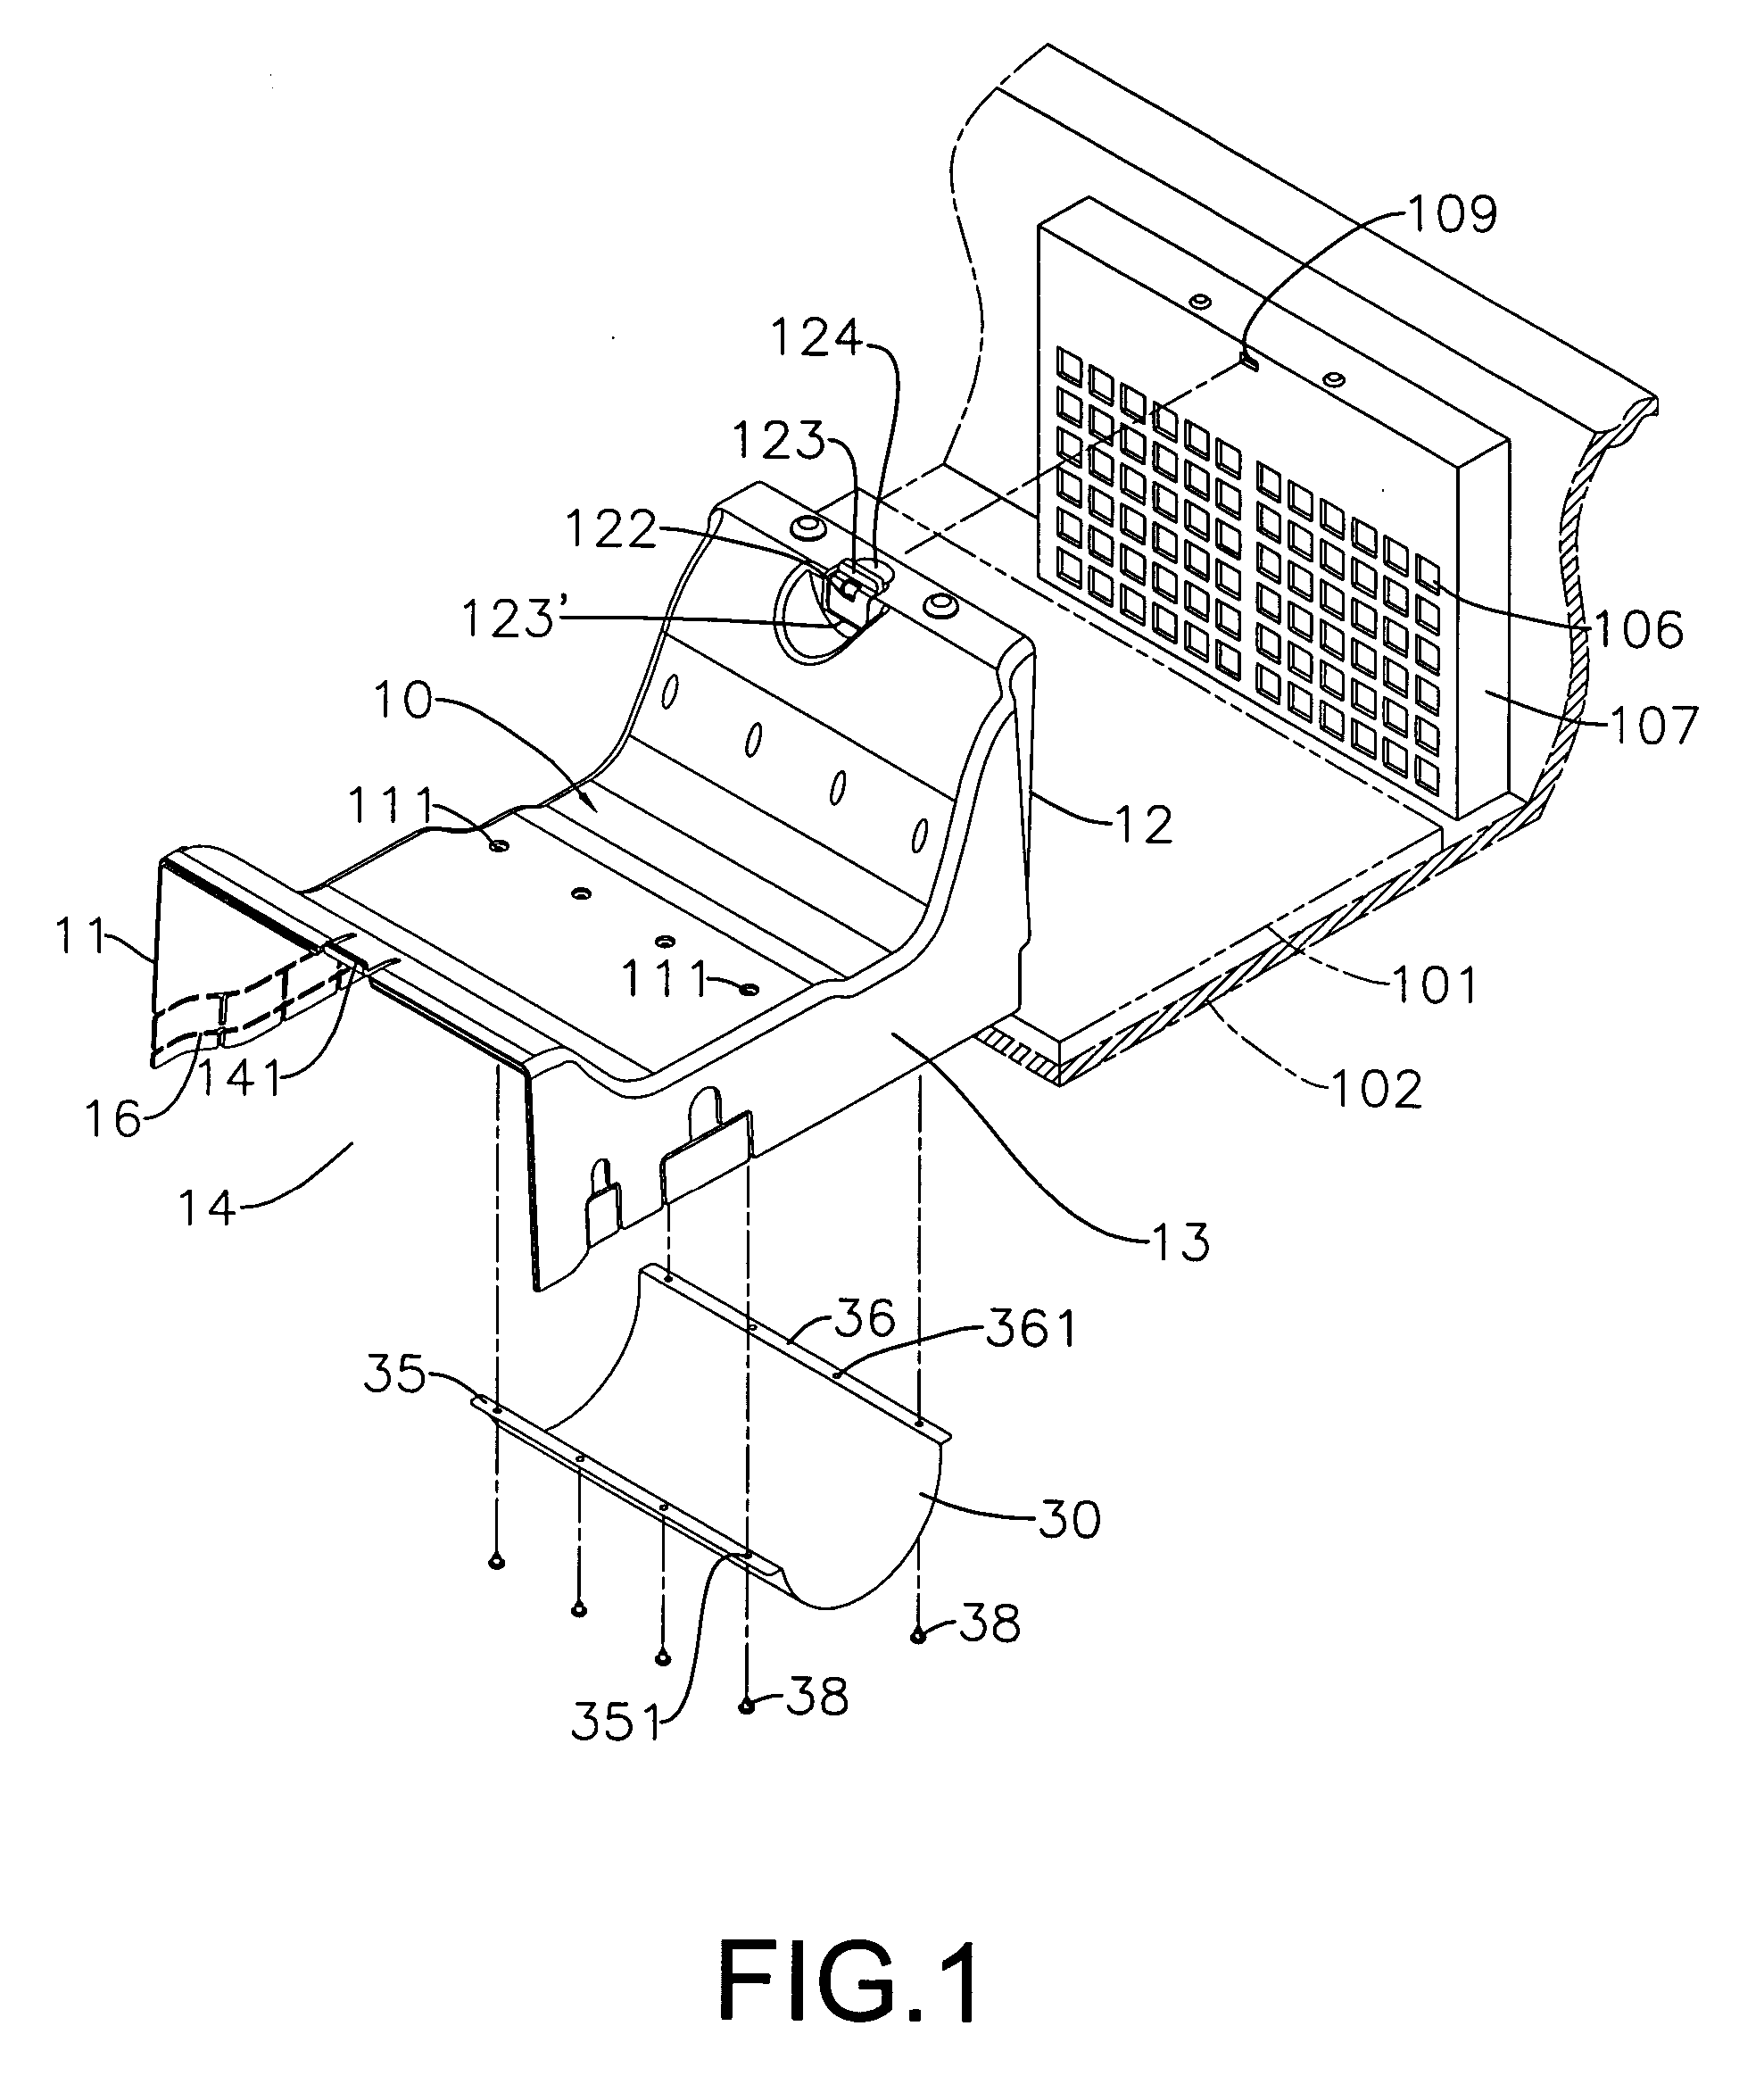 Air shroud for dissipating heat from an electronic component